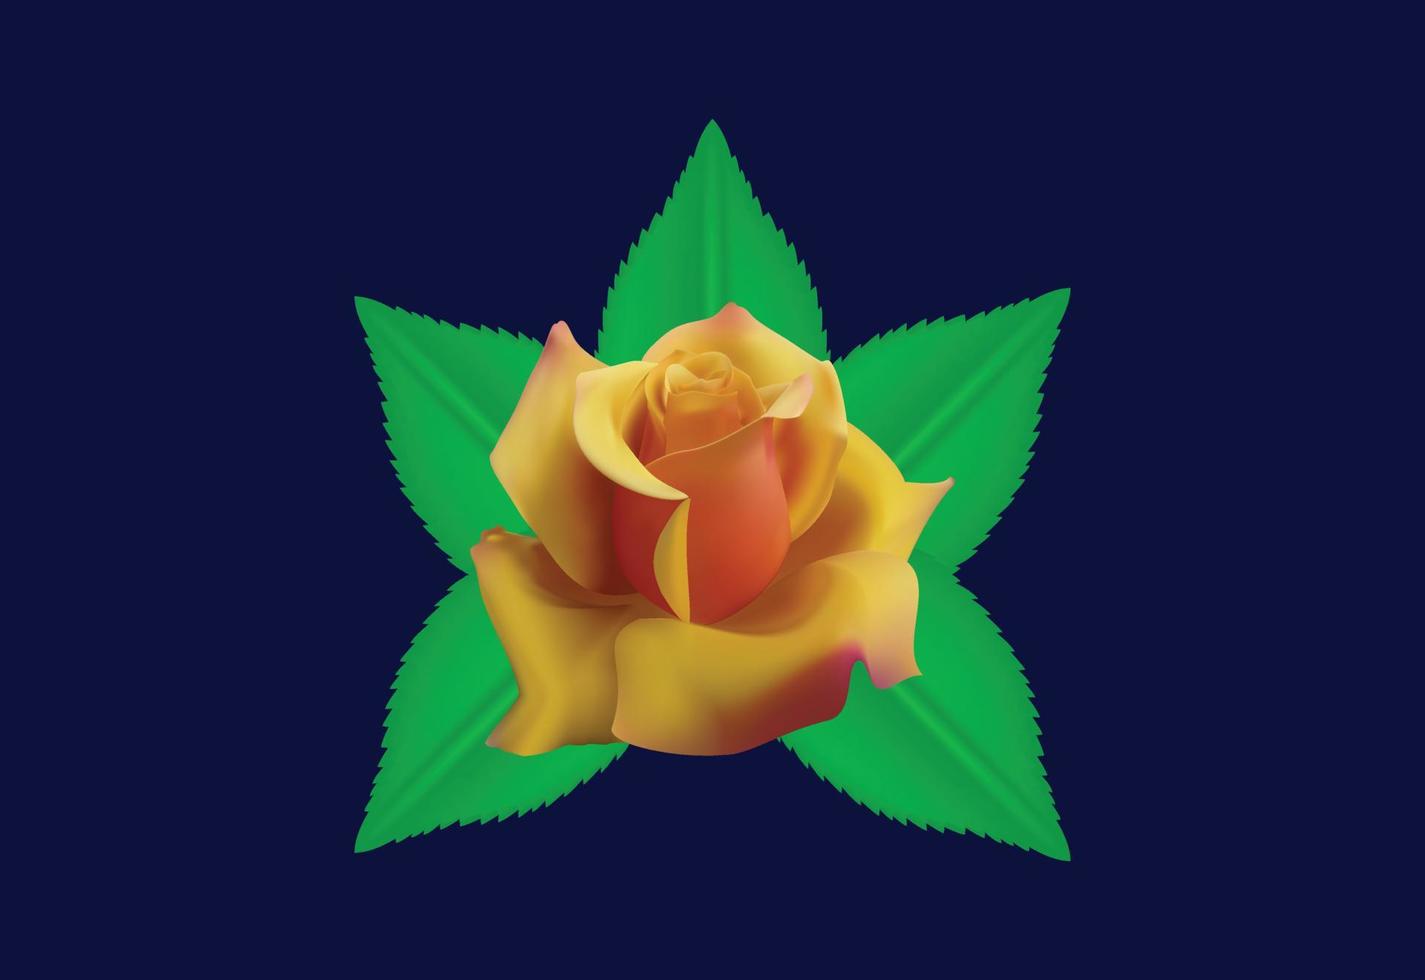 Realistic rose with green leaves vector illustration